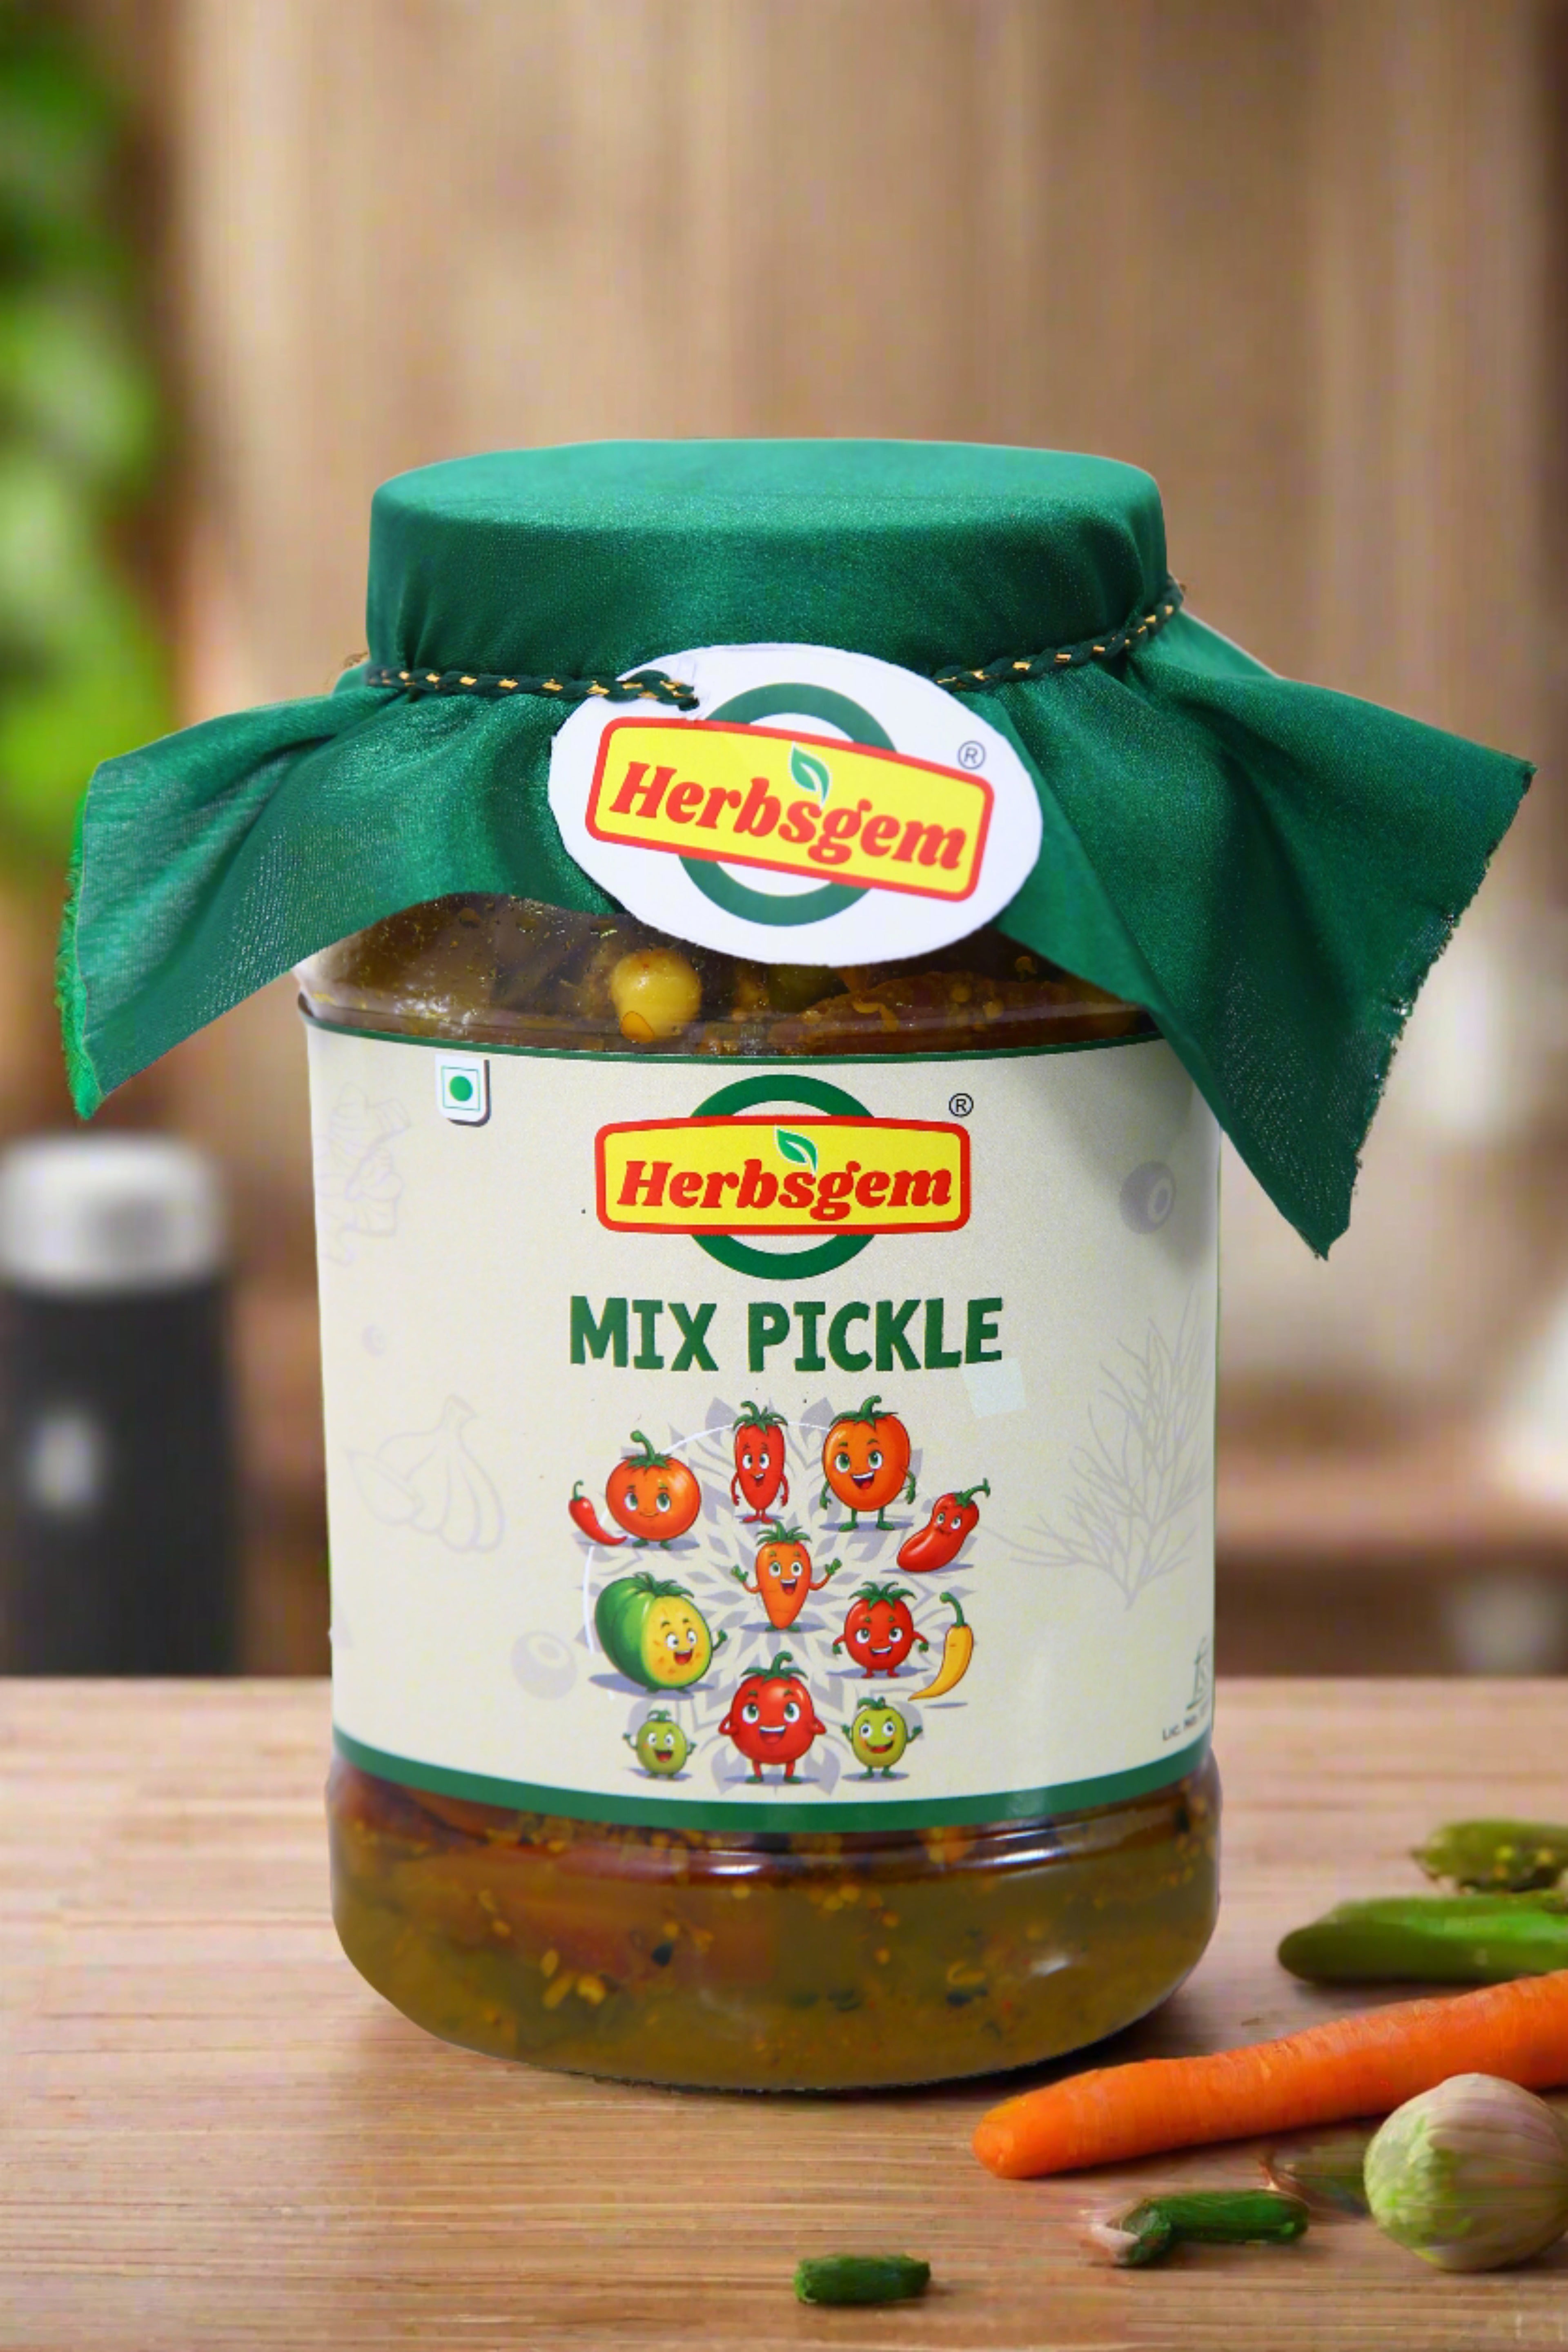 Herbsgem's Medley Marvel A Symphony of Flavors in our Signature Mixed Pickle